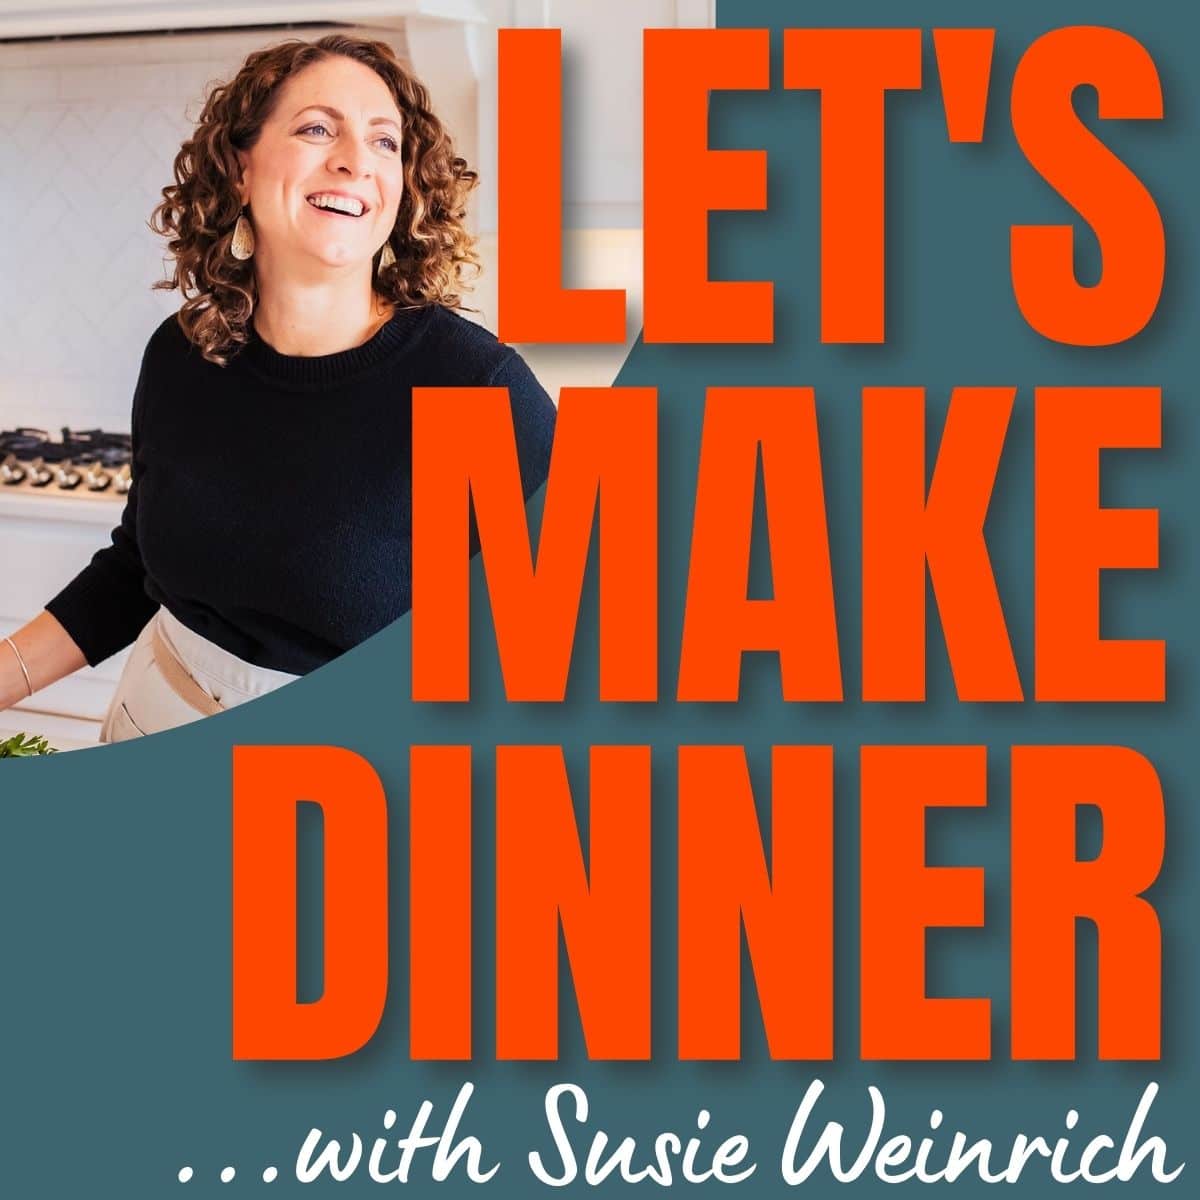 Let's Make Dinner Podcast with Susie Weinrich